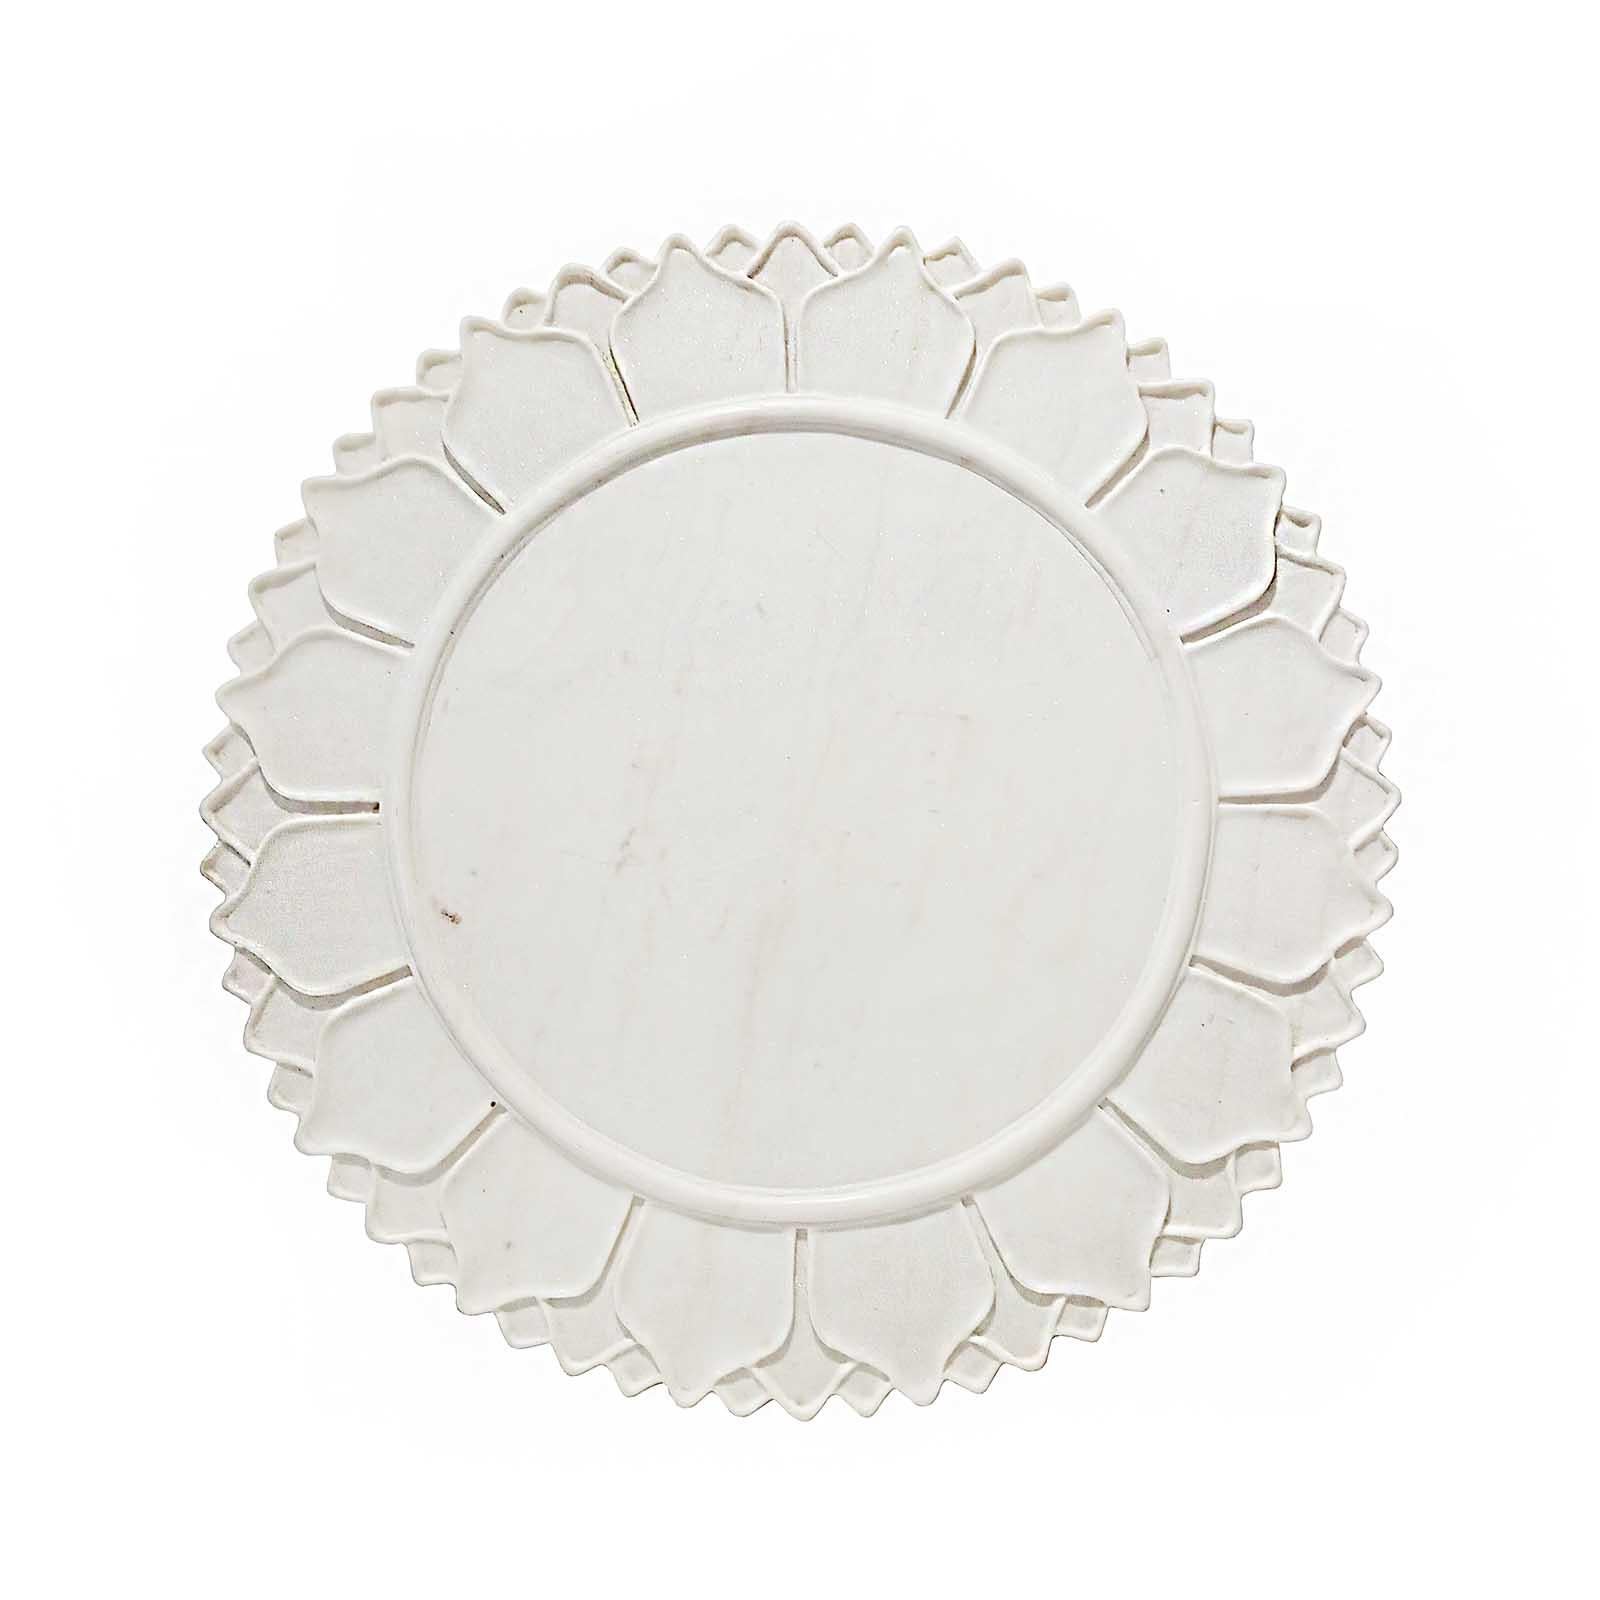 Anglo Raj Hand-Carved White Marble Server / Charger / Plate For Sale